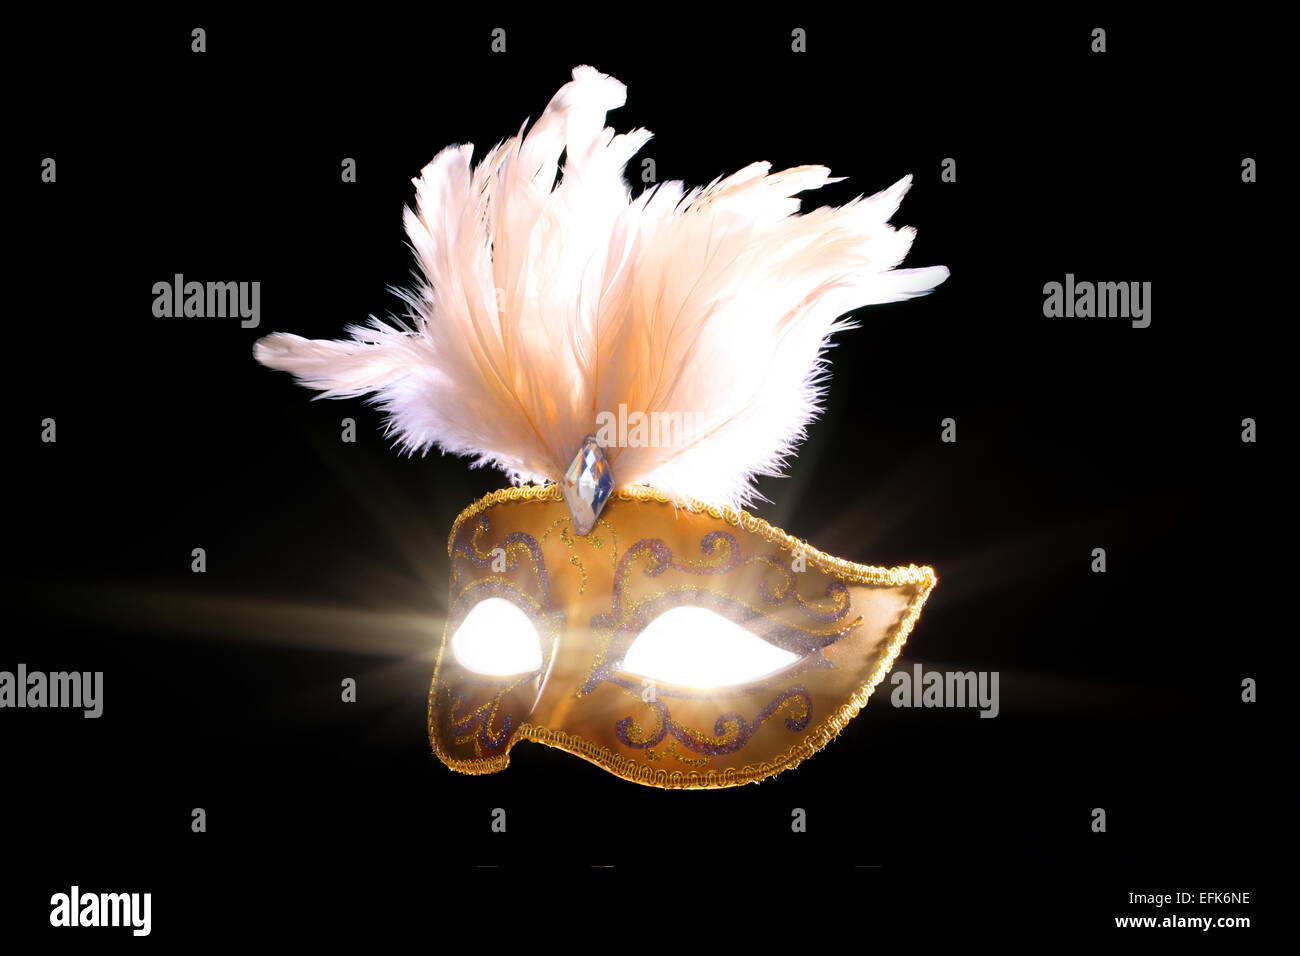 A back lit gold coloured Harlequin mask with flared light emanating from the eyes Stock Photo